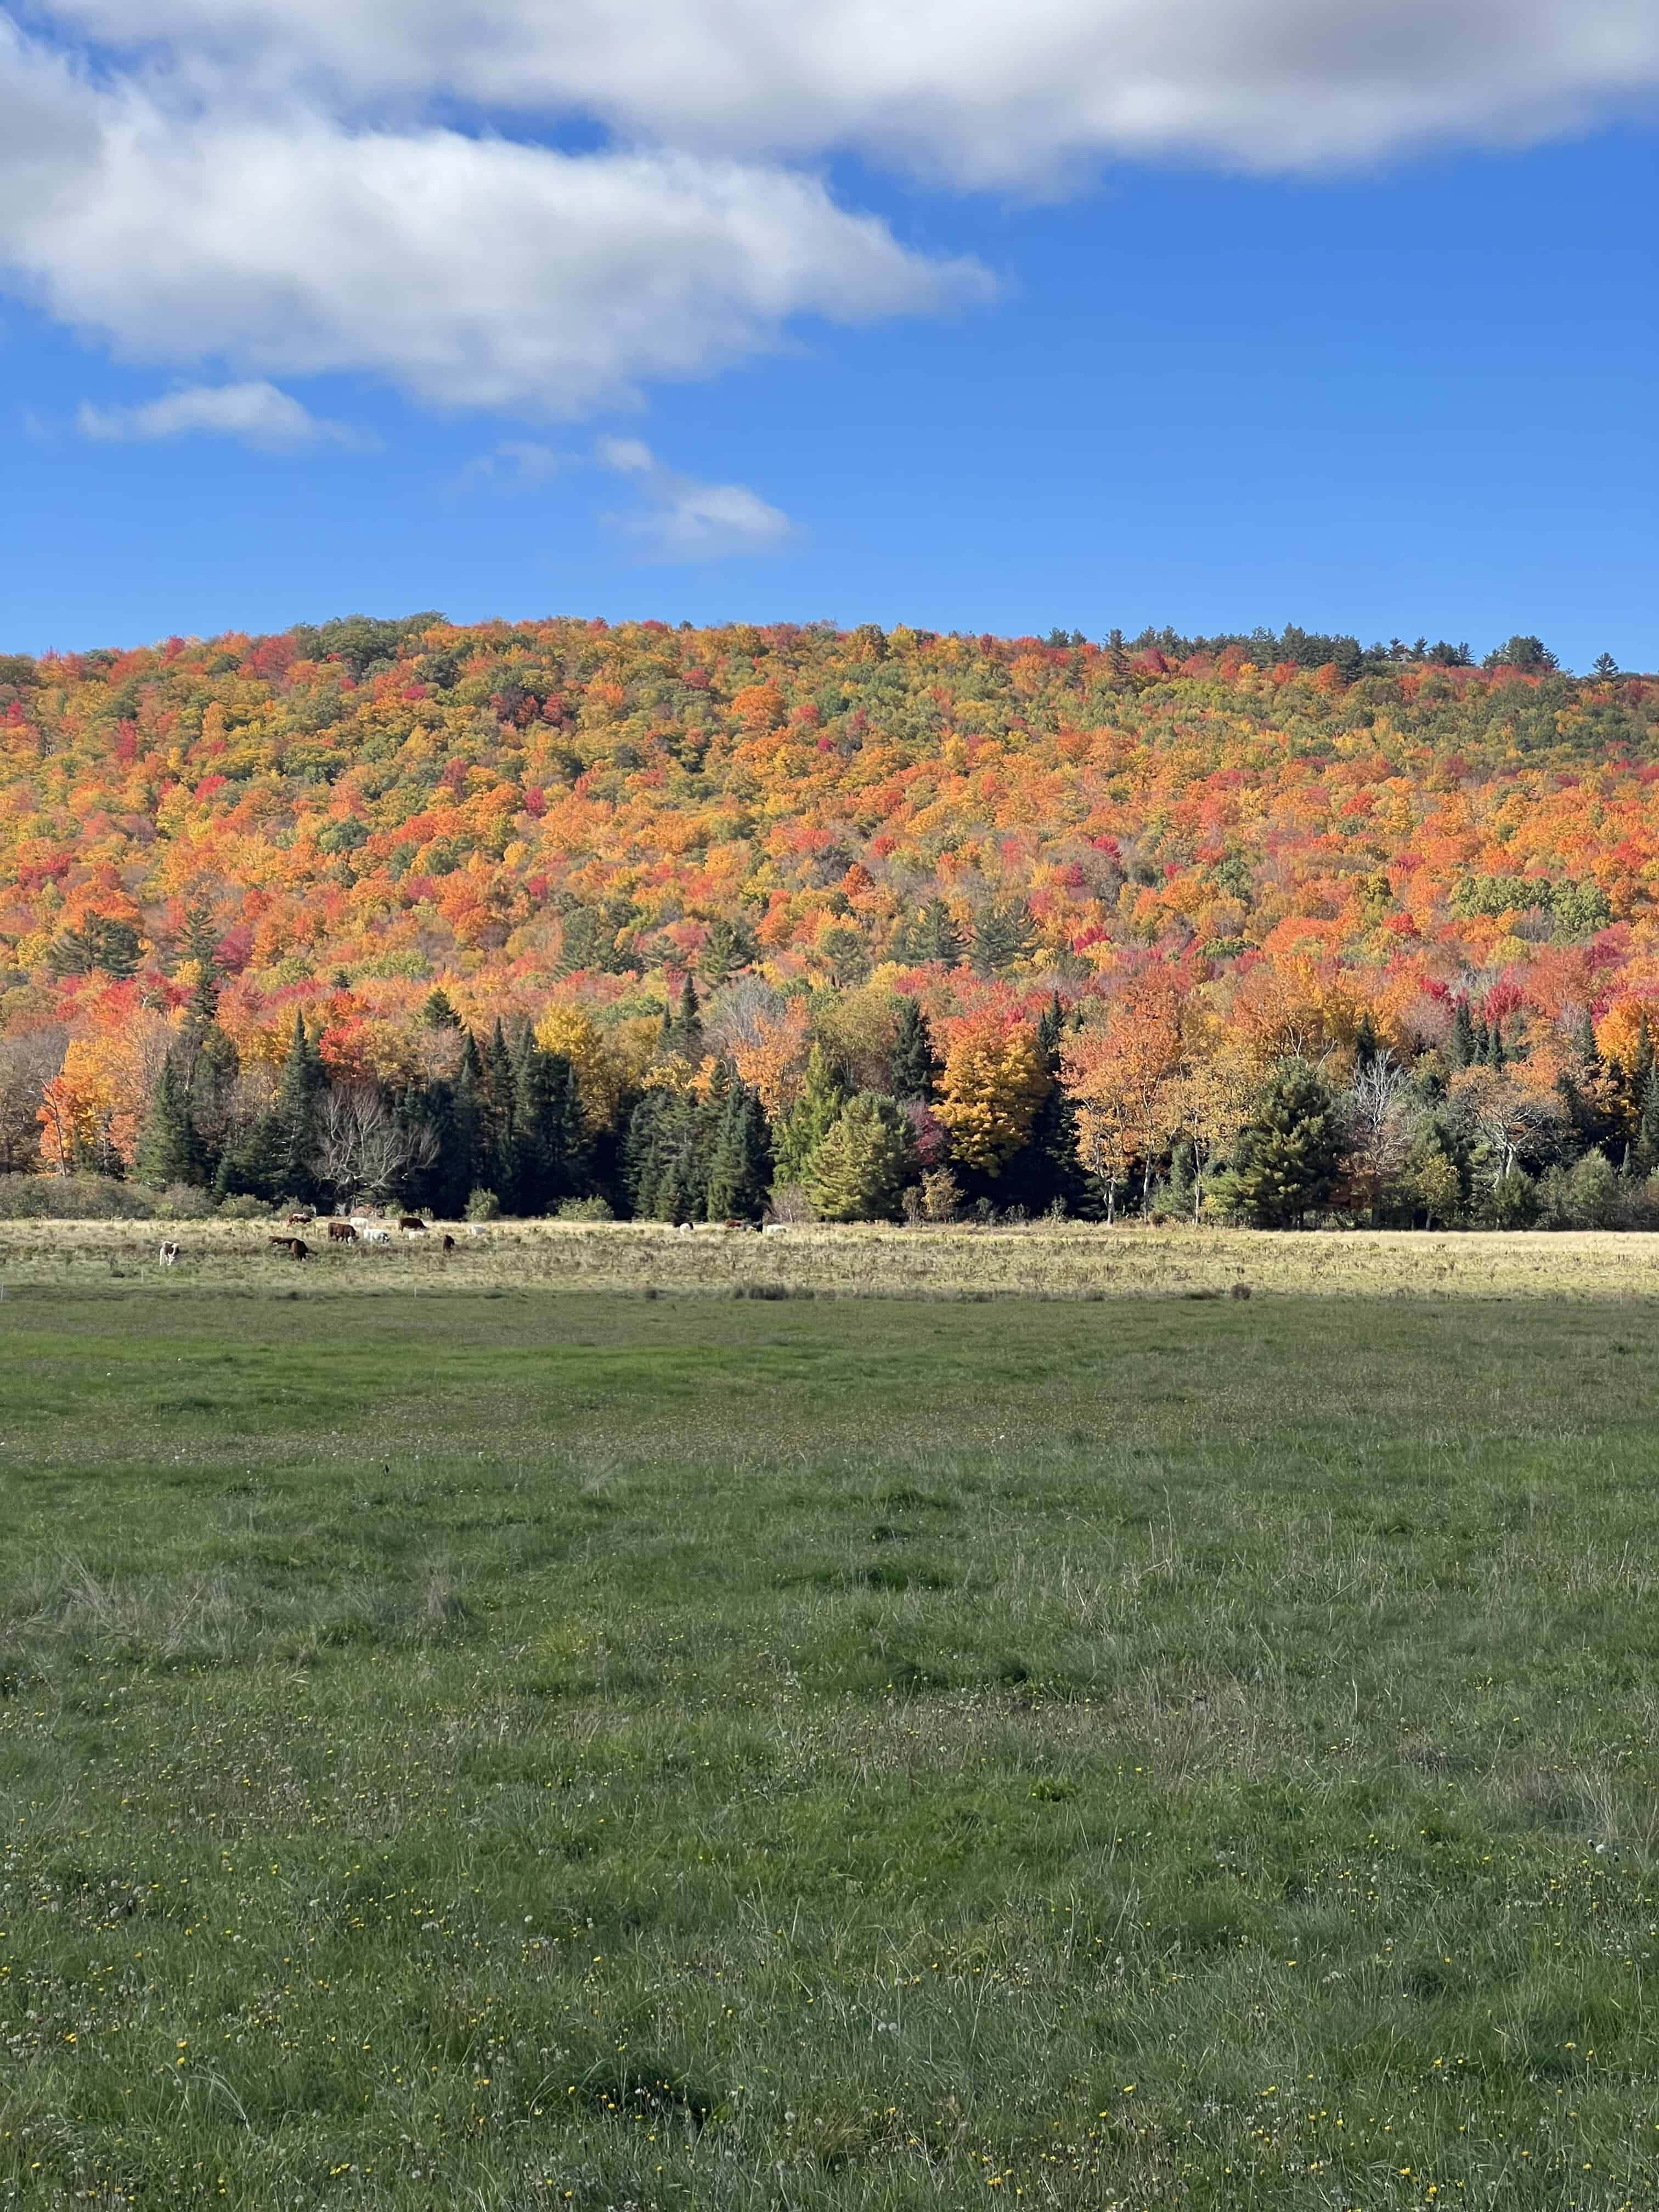 a large grassy field is set in front of a low hill that is covered in fall foliage: this is a New England autumn scene